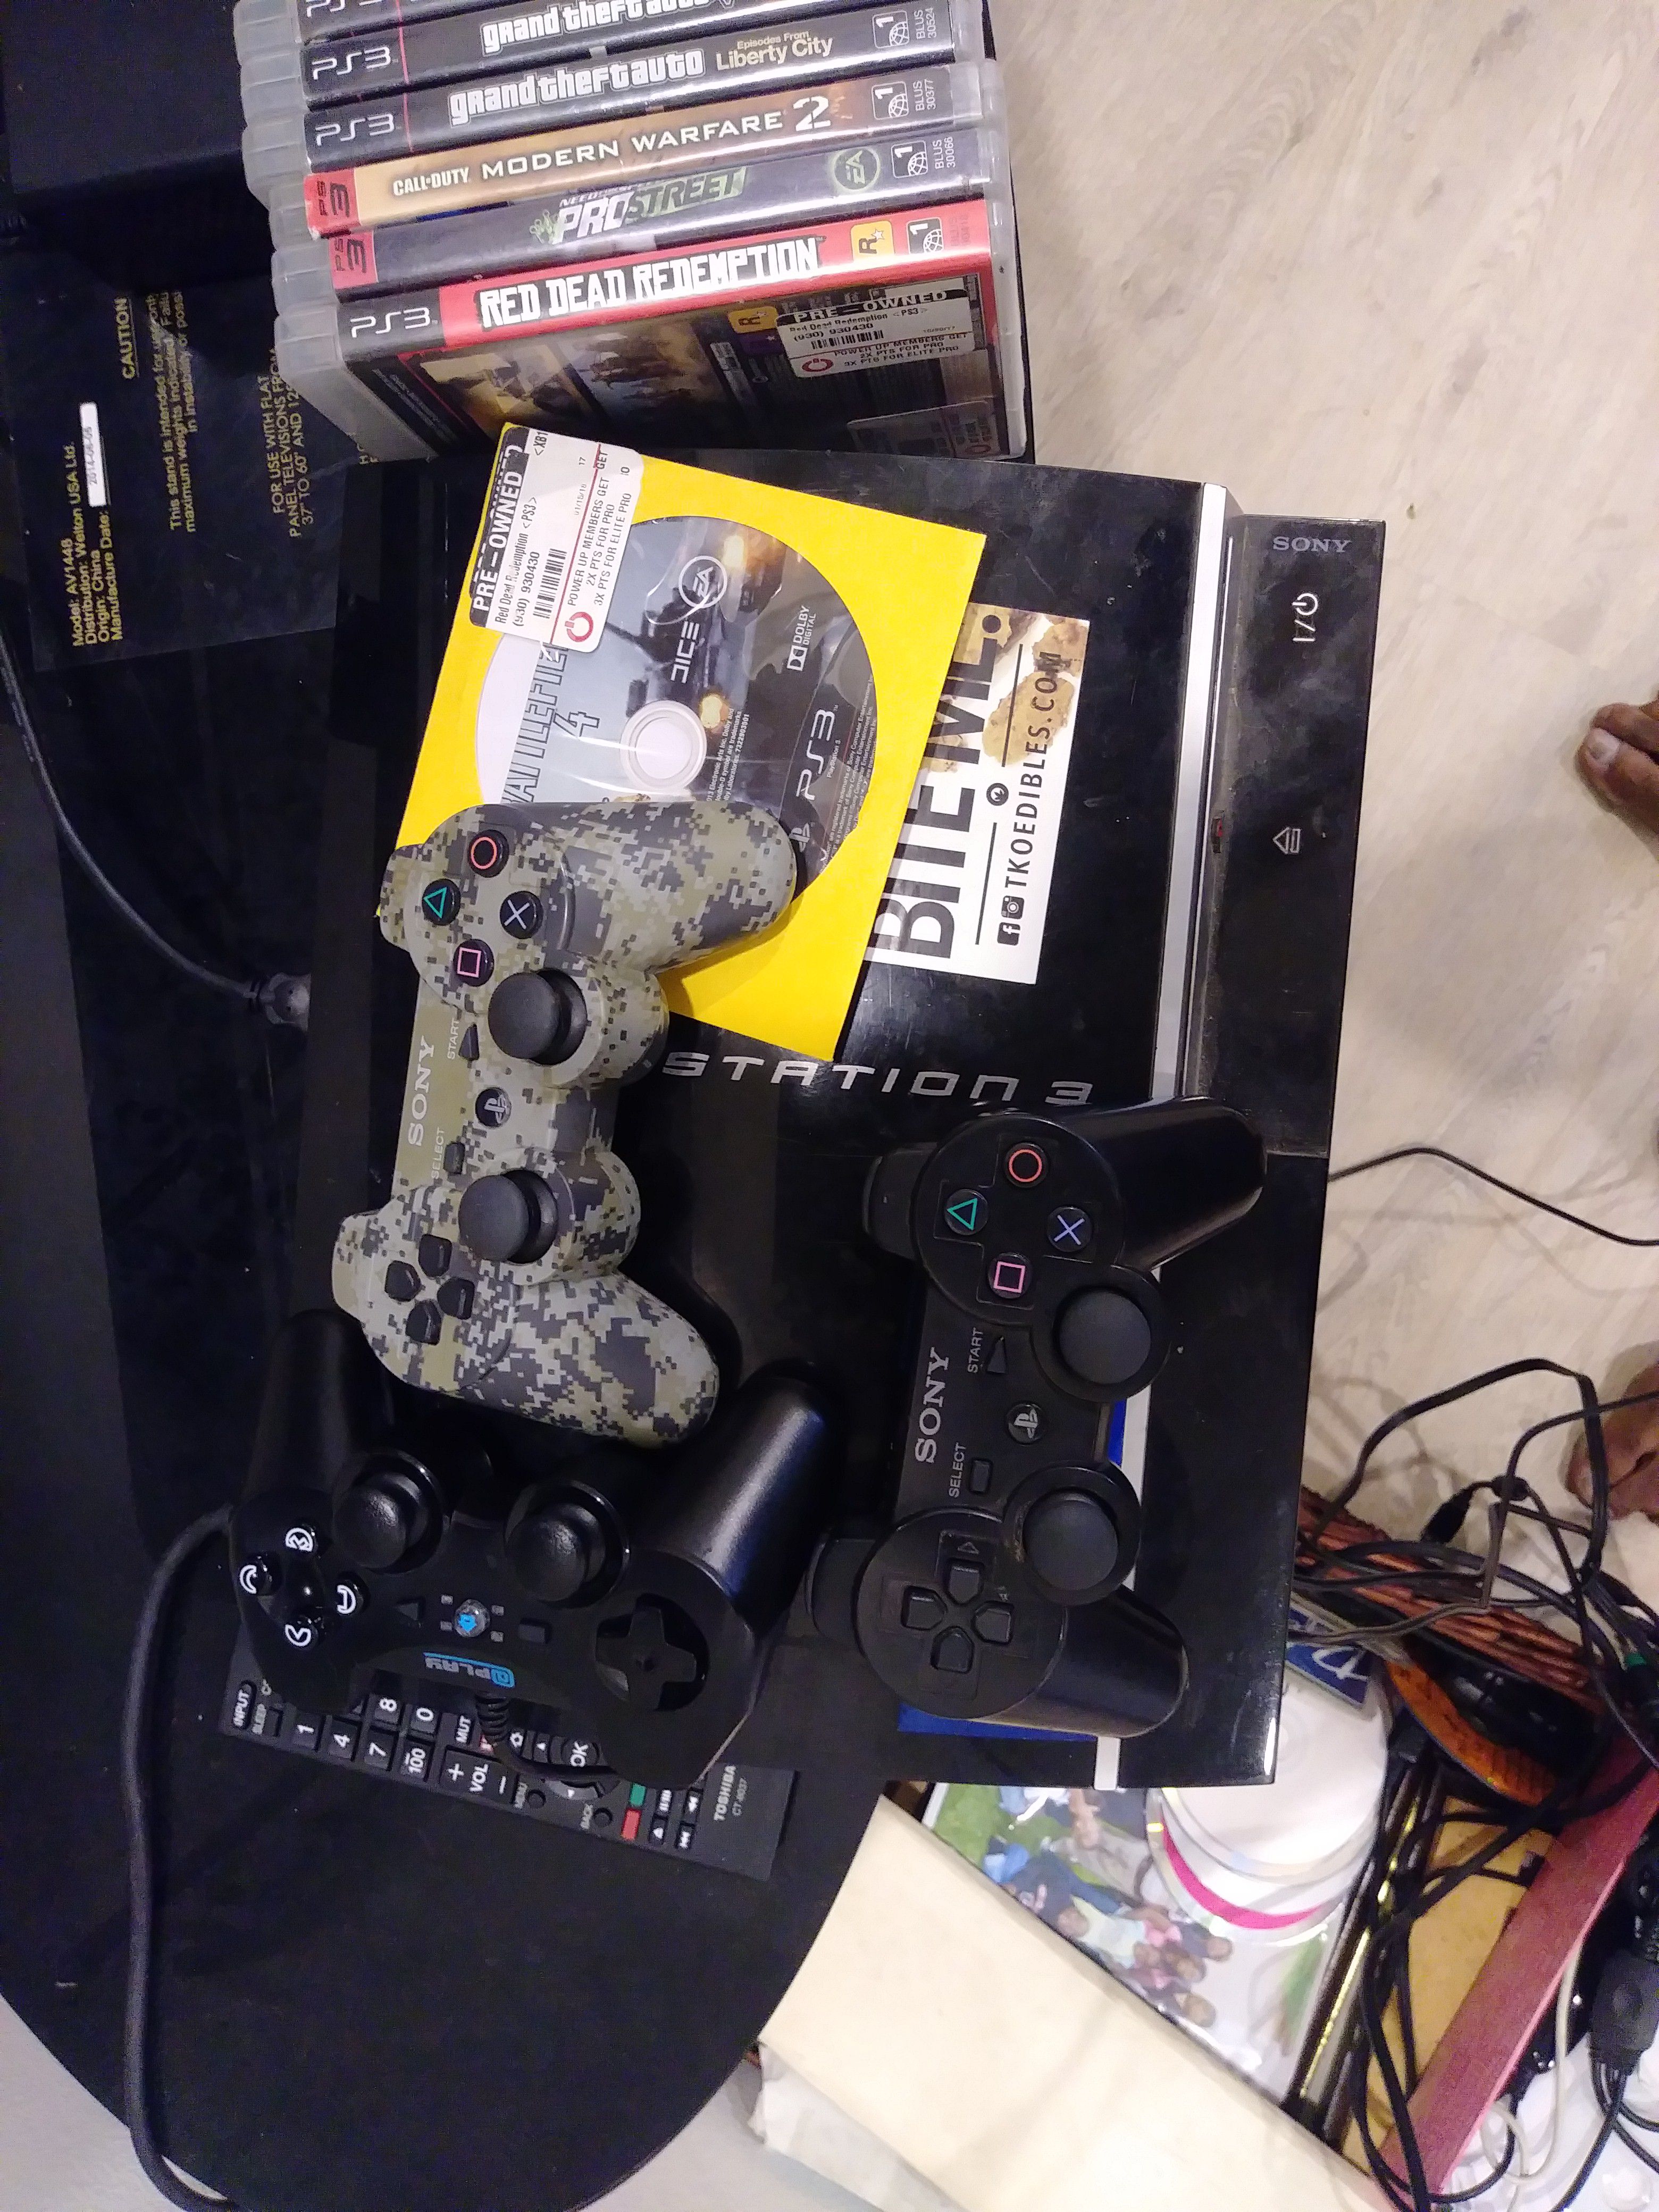 Ps3, games and console with cords and an online account